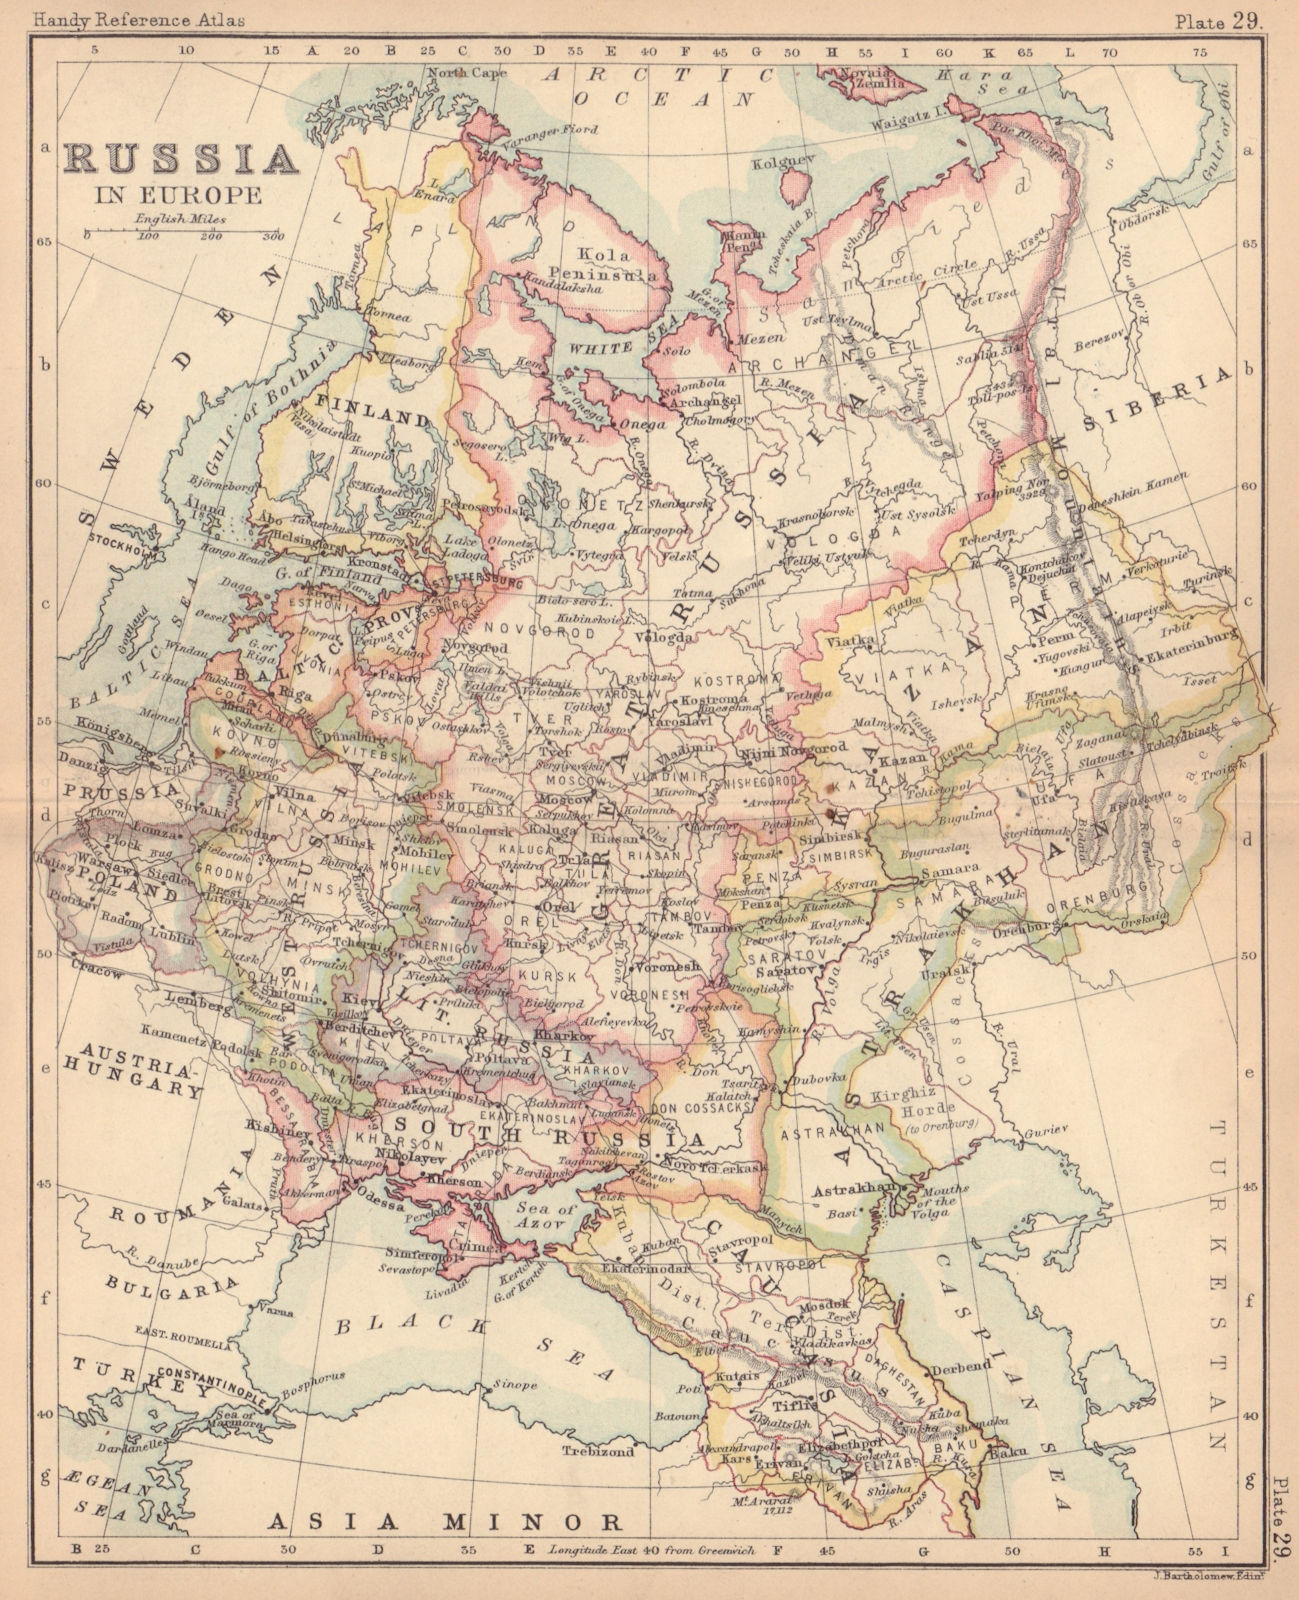 Associate Product Russia in Europe. Poland. West/Little/Great/South Russia. BARTHOLOMEW 1888 map